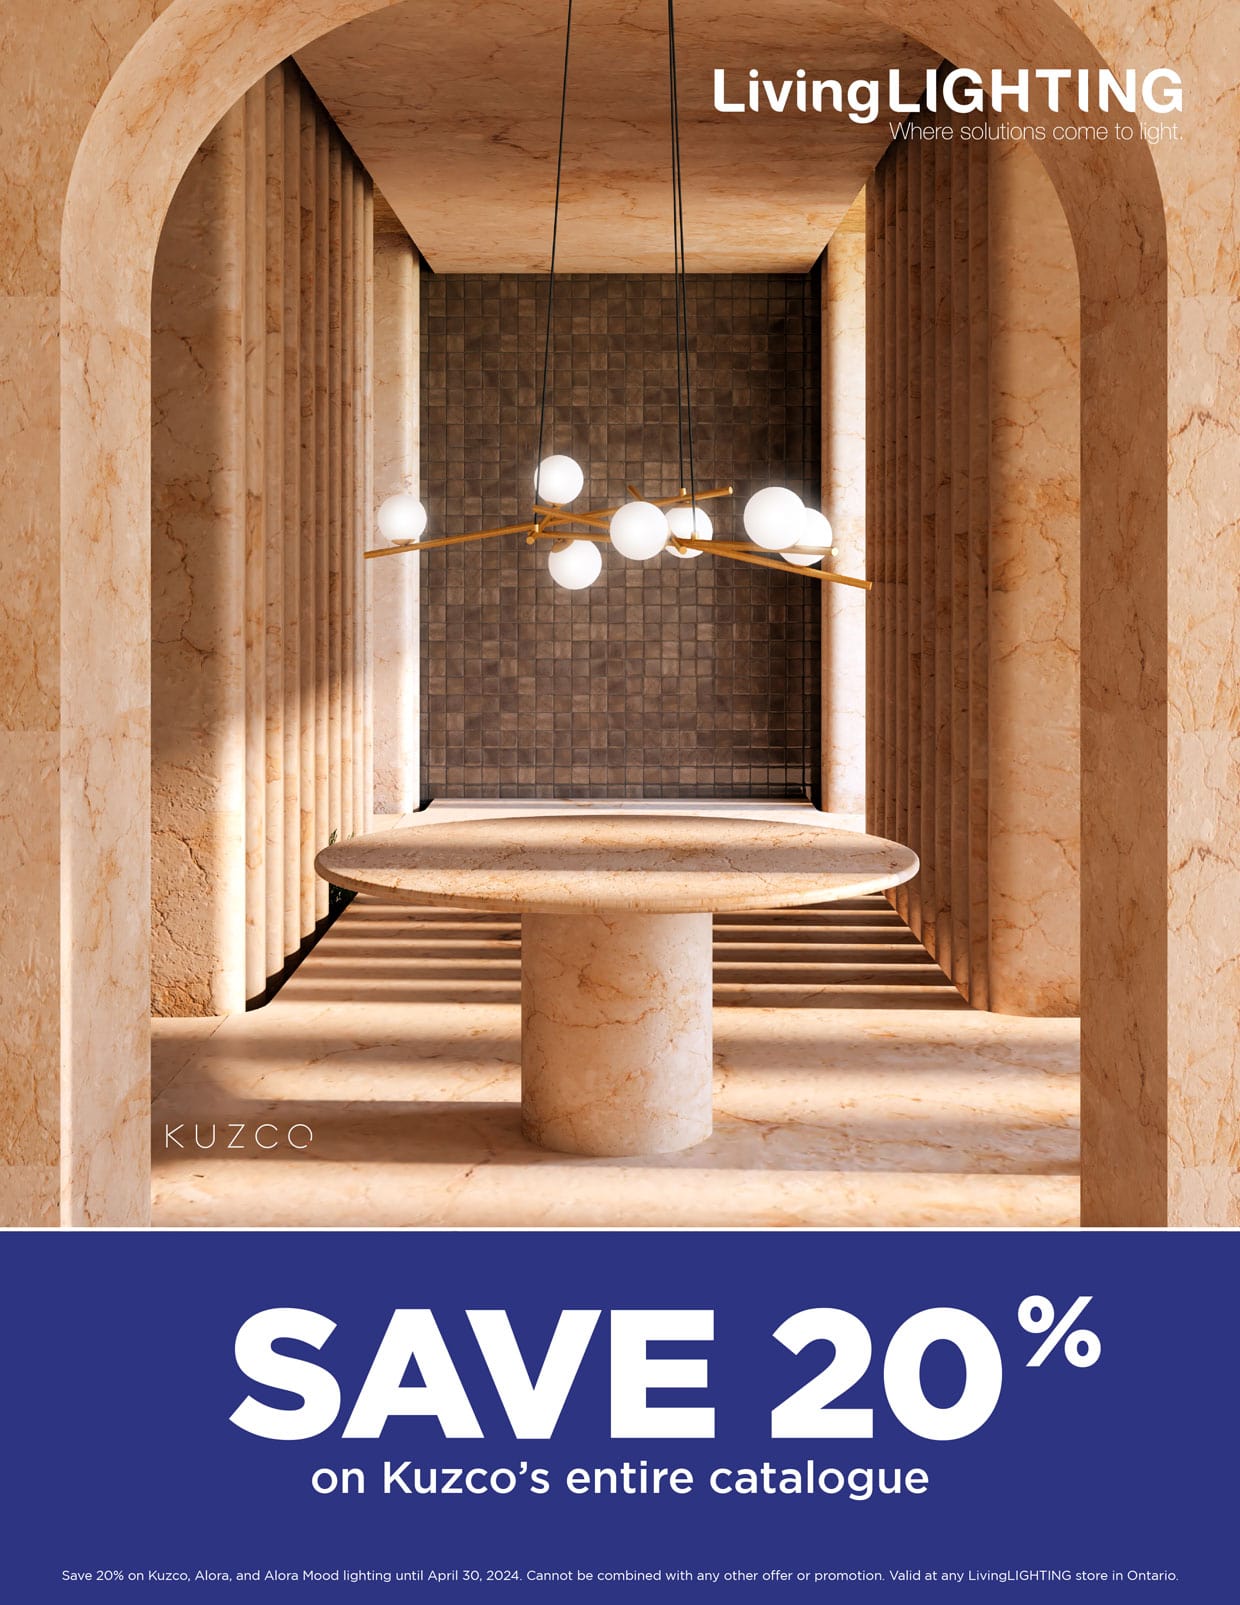 Save 20% on Kuzco's entire catalogue